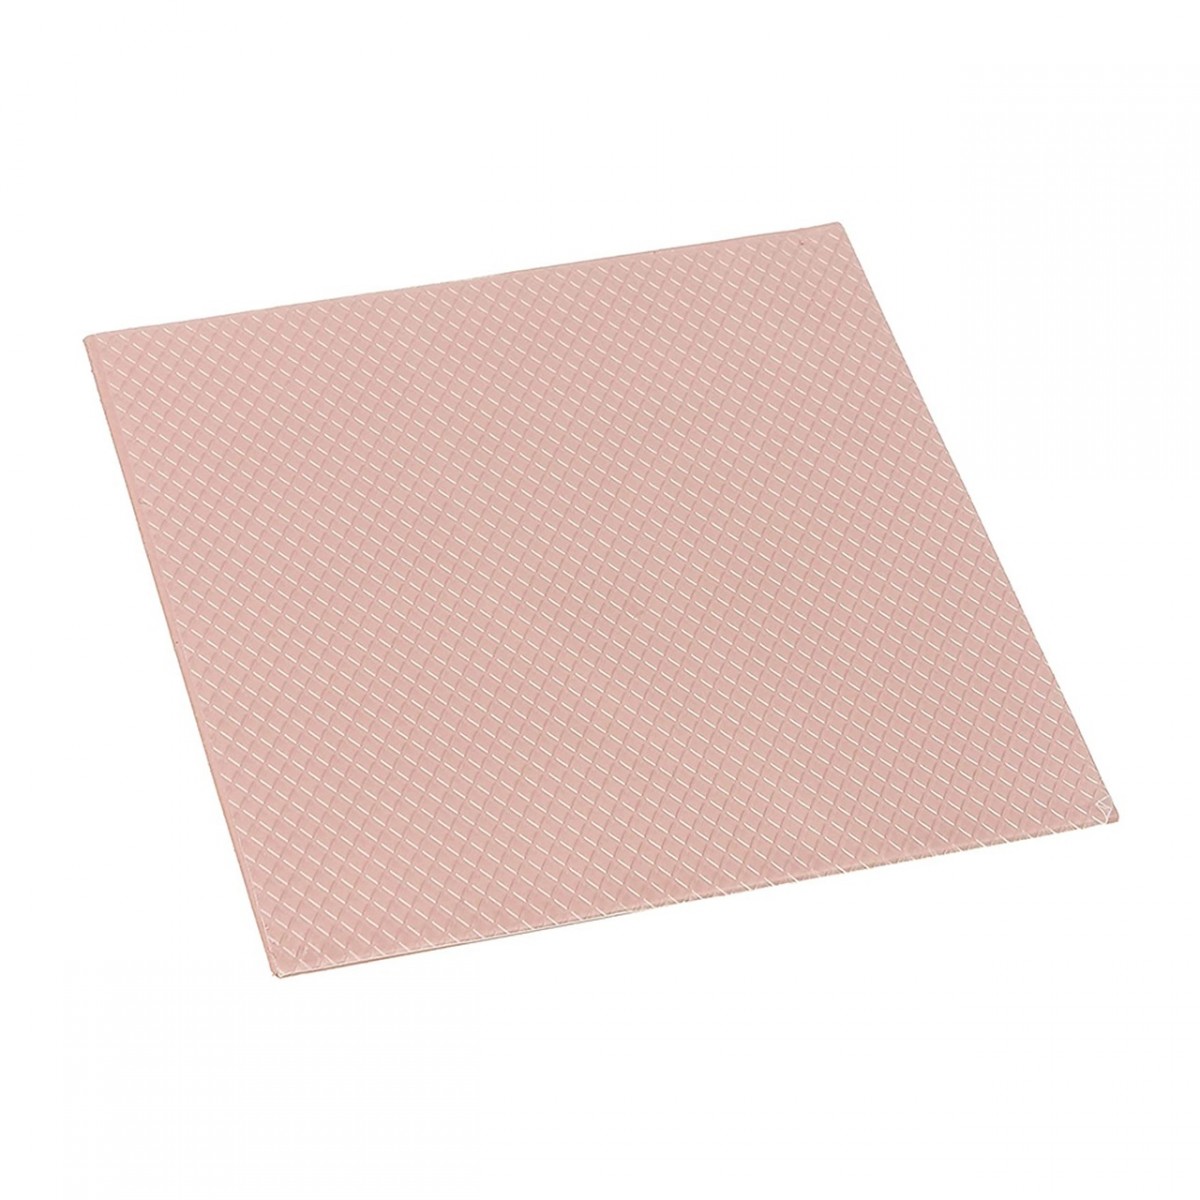 Thermal Pad Thermal Grizzly Minus Pad 8, 100 x 100 x 1.5mm, TG-MP8-100-100-15-1R